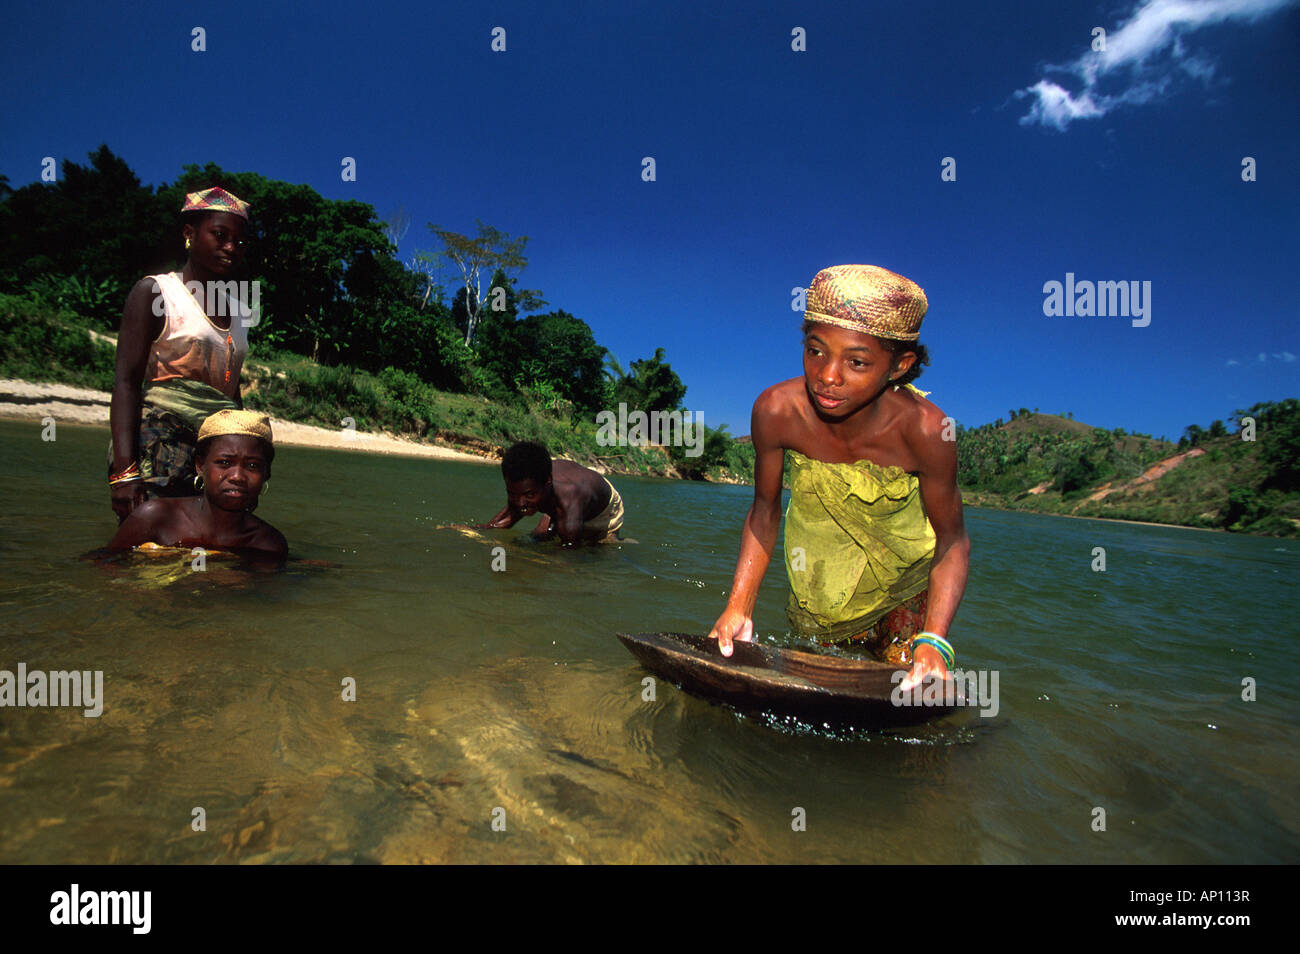 Women panning for gold, Washing gold out of a river, Namarona River, East Madagascar, Africa Stock Photo